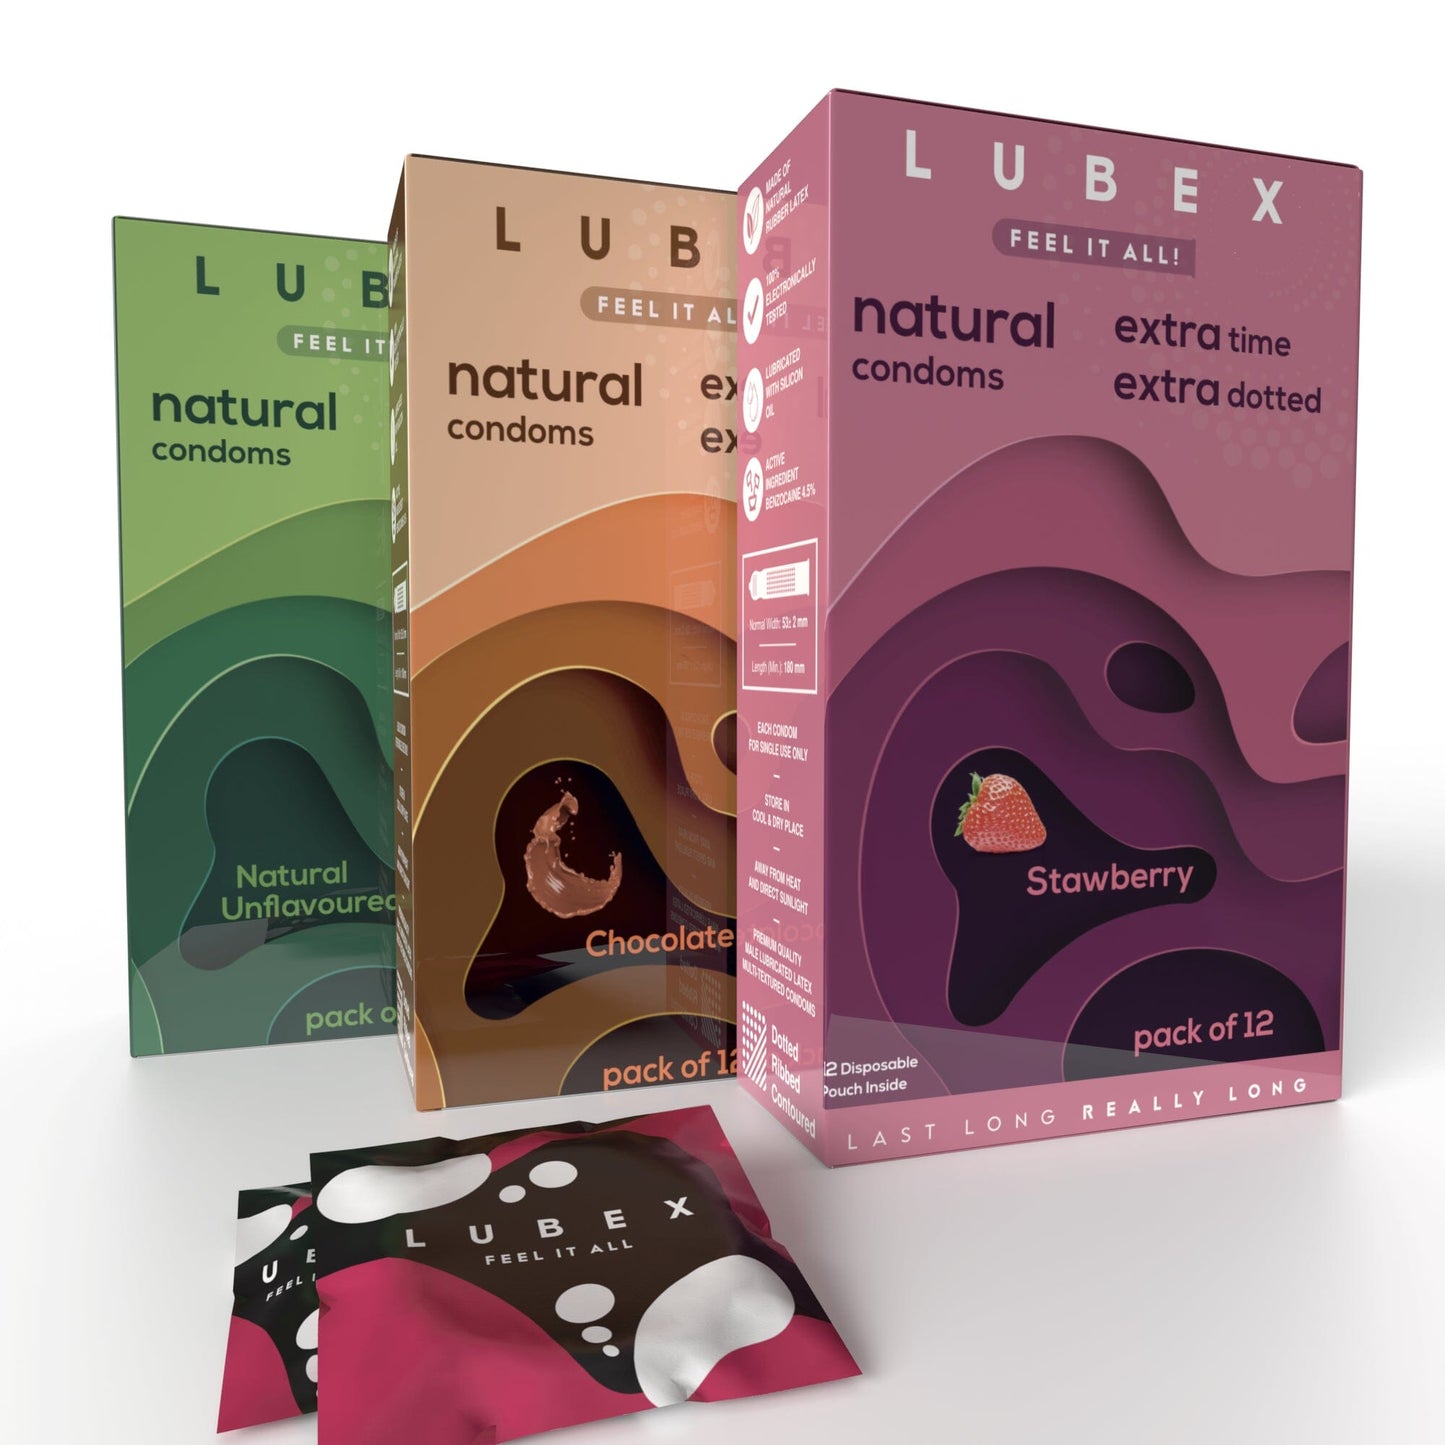 Lubex Condom - 6 in 1 Long Lasting Condoms with Disposable Bags - Ultra Thin & Extra Dotted